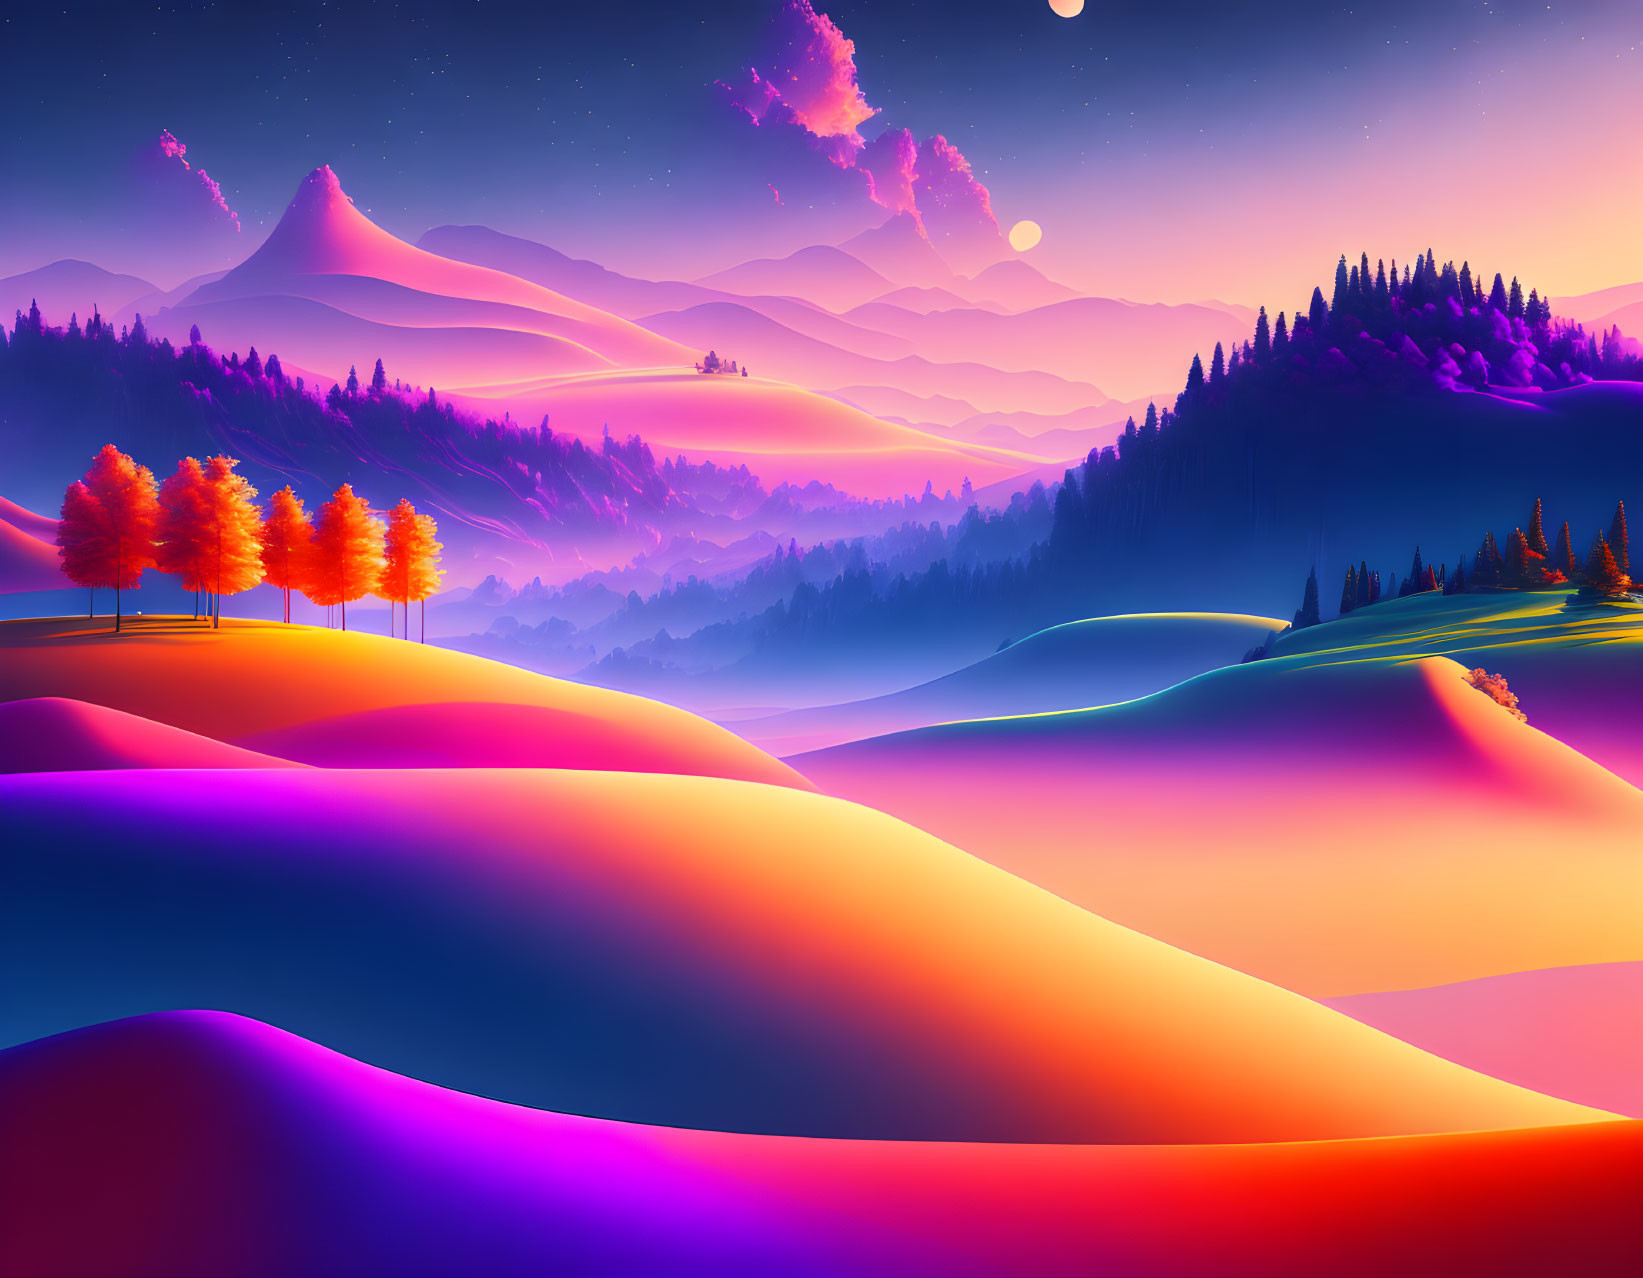 Neon-colored digital landscape with purple sky and two moons